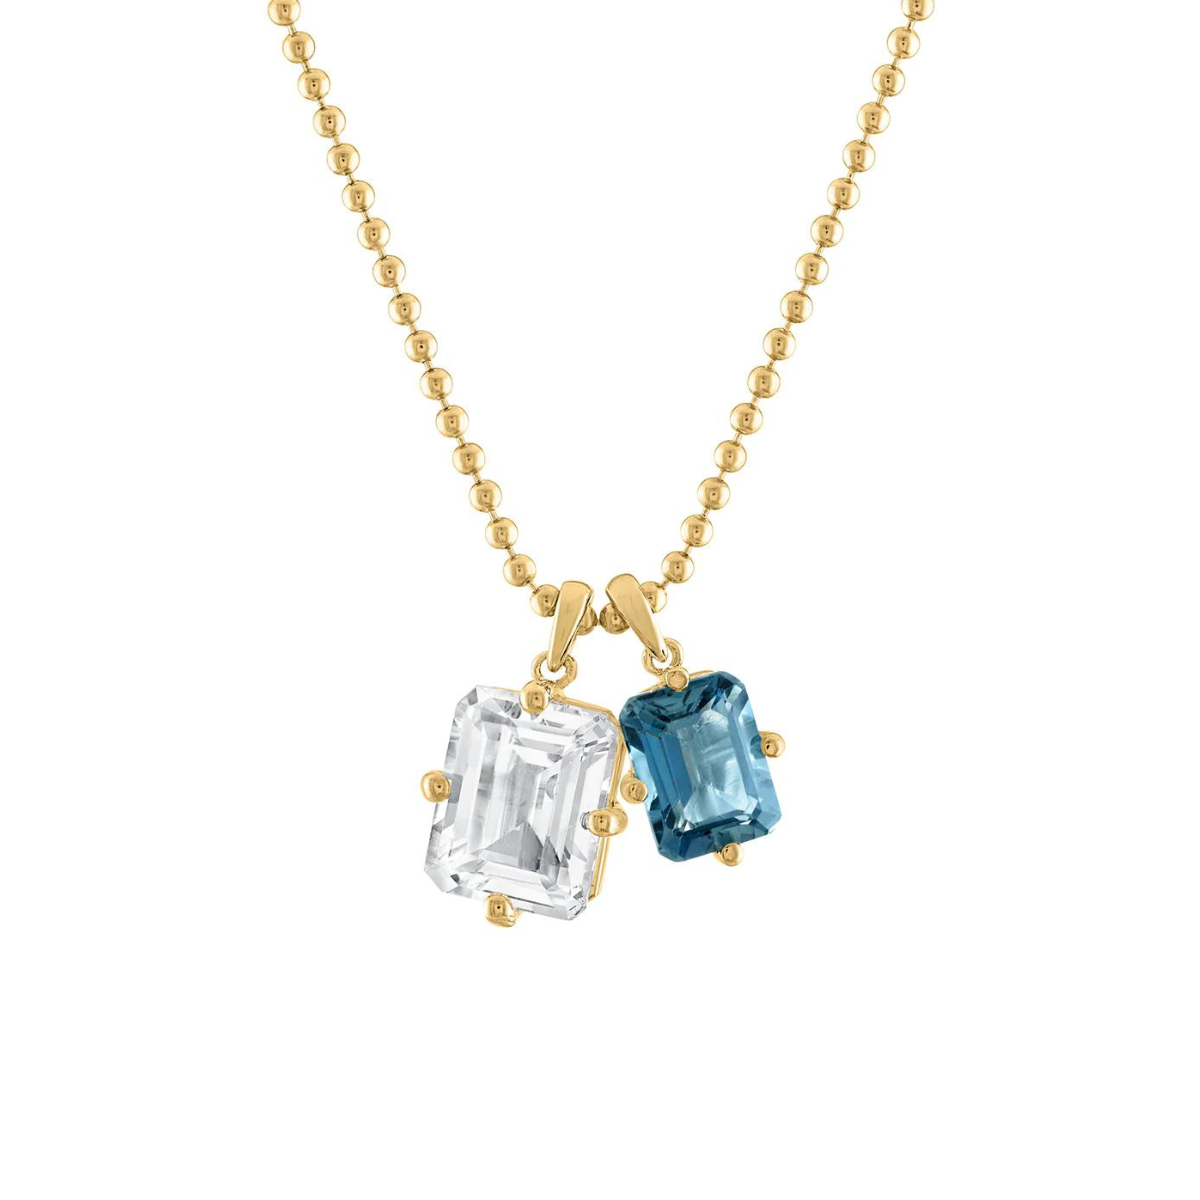 14K Gold Emerald Cut Charms on Chain